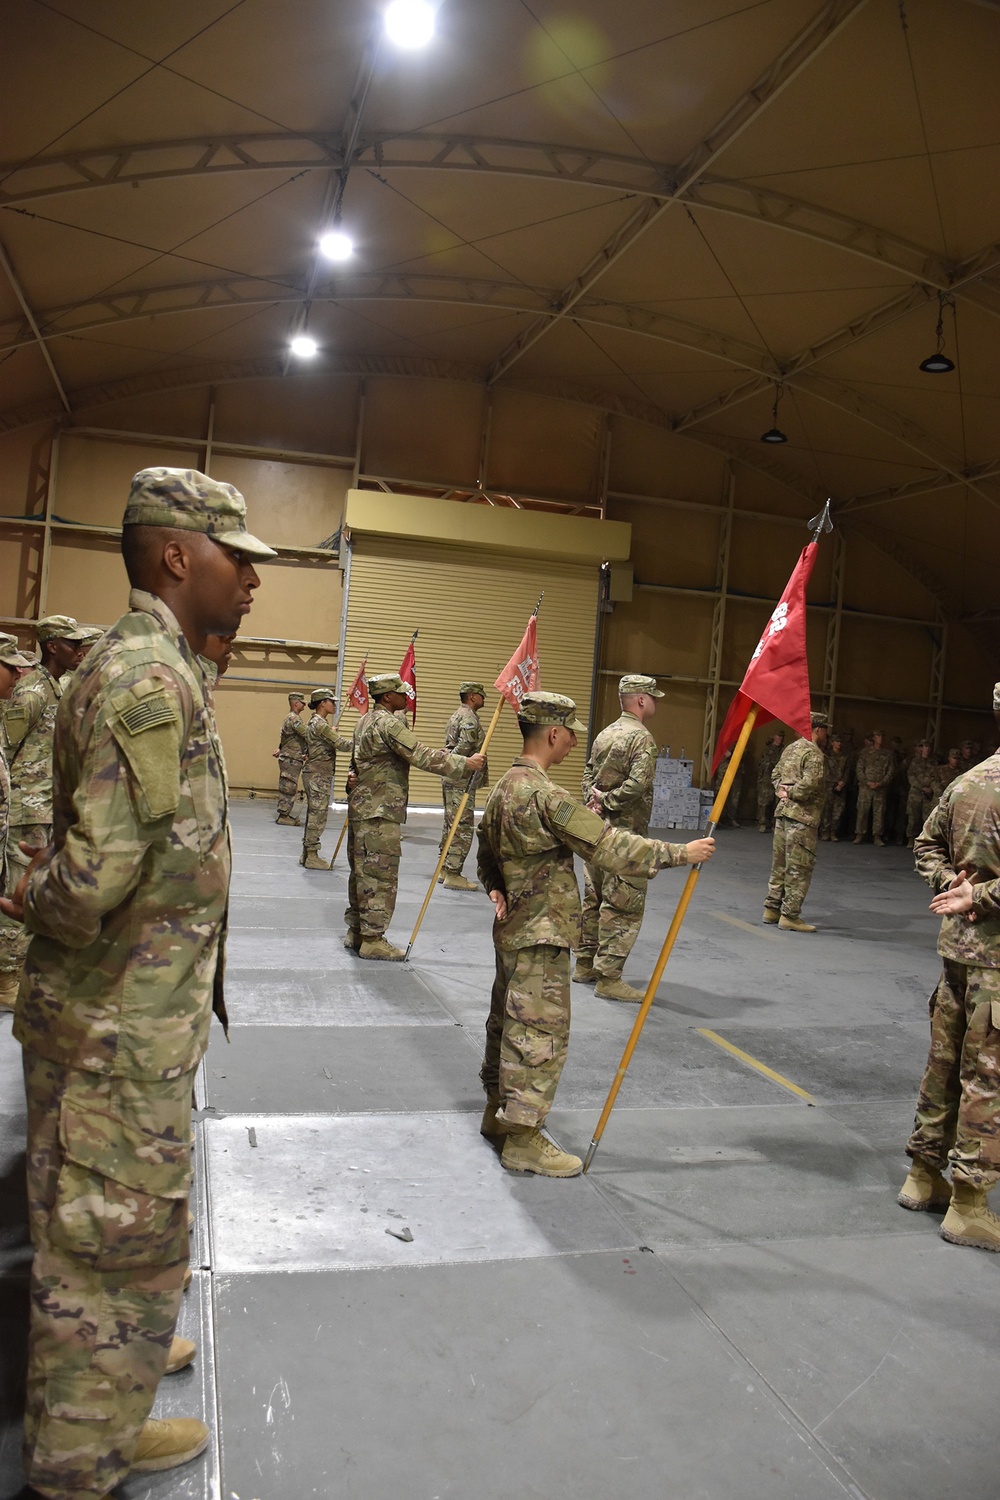 505th Engineer Combat Battalion completes 9-month deployment, welcomes 92nd Engineer Battalion